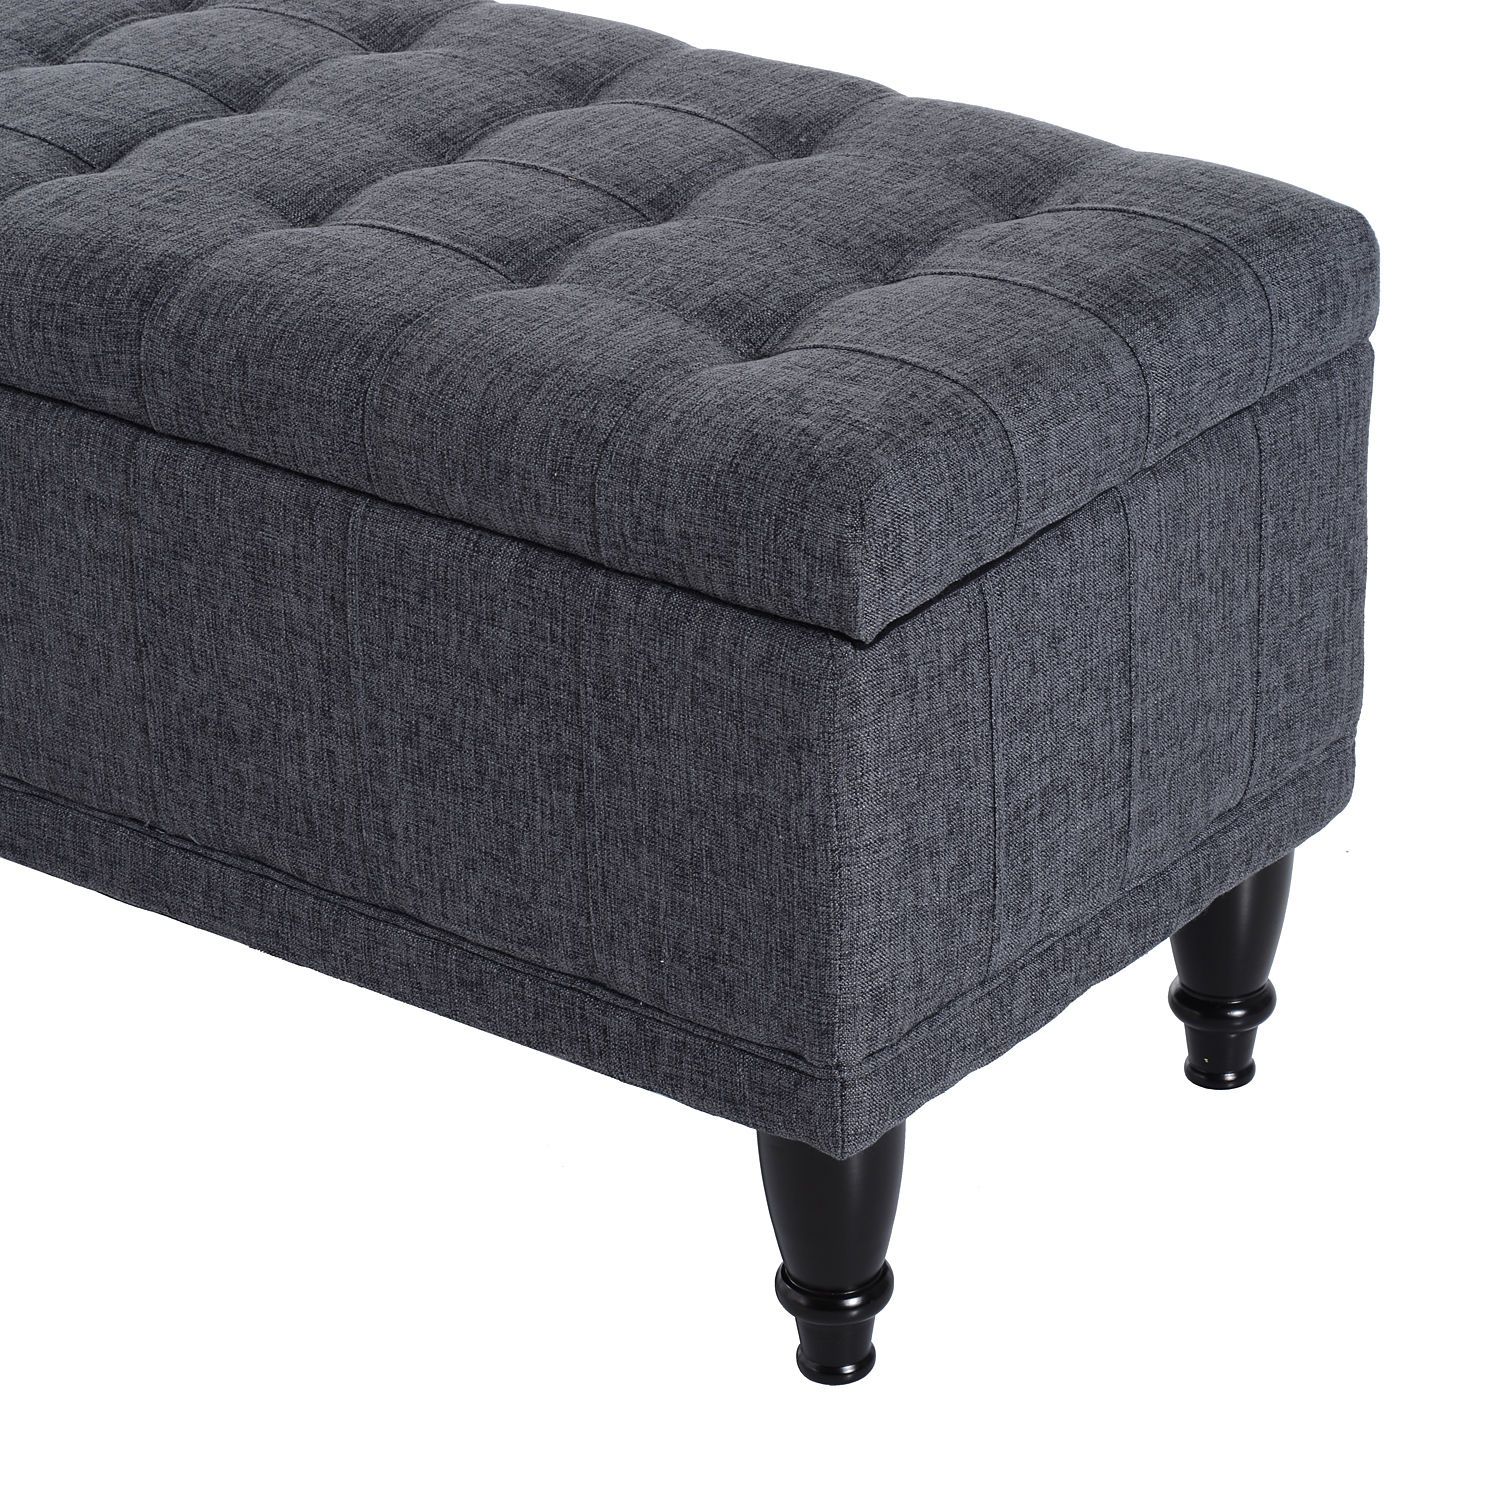 42" Lift Top Storage Ottoman Tufted Fabric Shoe Bench Footrest Stool With Regard To Tufted Fabric Ottomans (View 15 of 20)